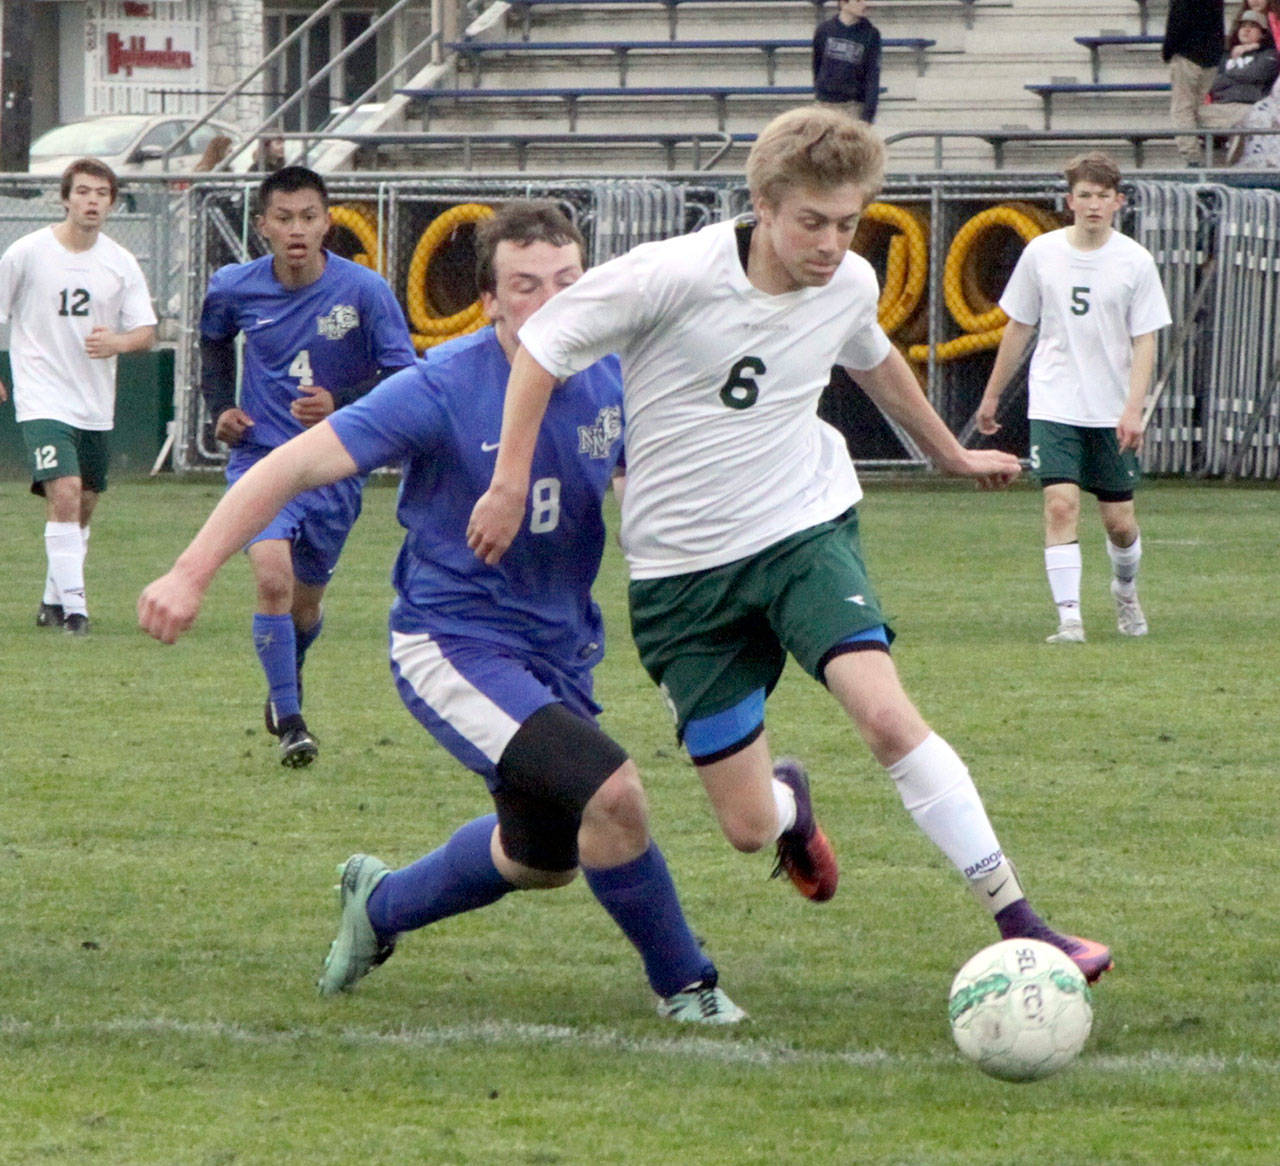 By Dave Logan/for Peninsula Daily News Port Angeles’ Ben Schneider (6) fends off North Mason’s Richard Miller in the Roughriders’ 6-0 win Monday night at Civic Field. The win keeps the Riders in good position for a playoff slot.